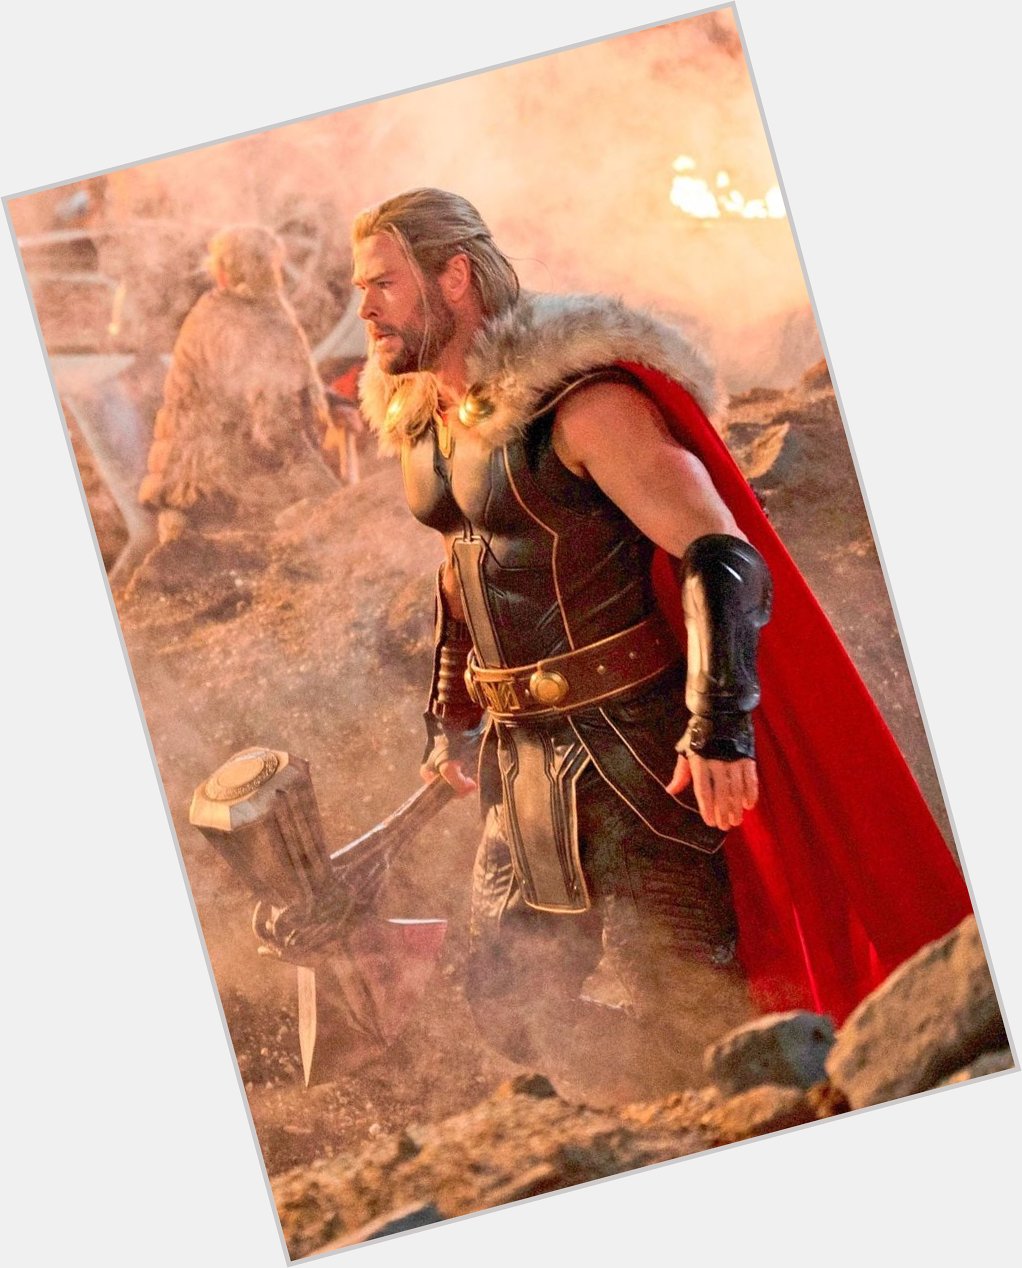 HBD to the one and o n l y ( ) Thor. 
Happy birthday, Chris Hemsworth! 